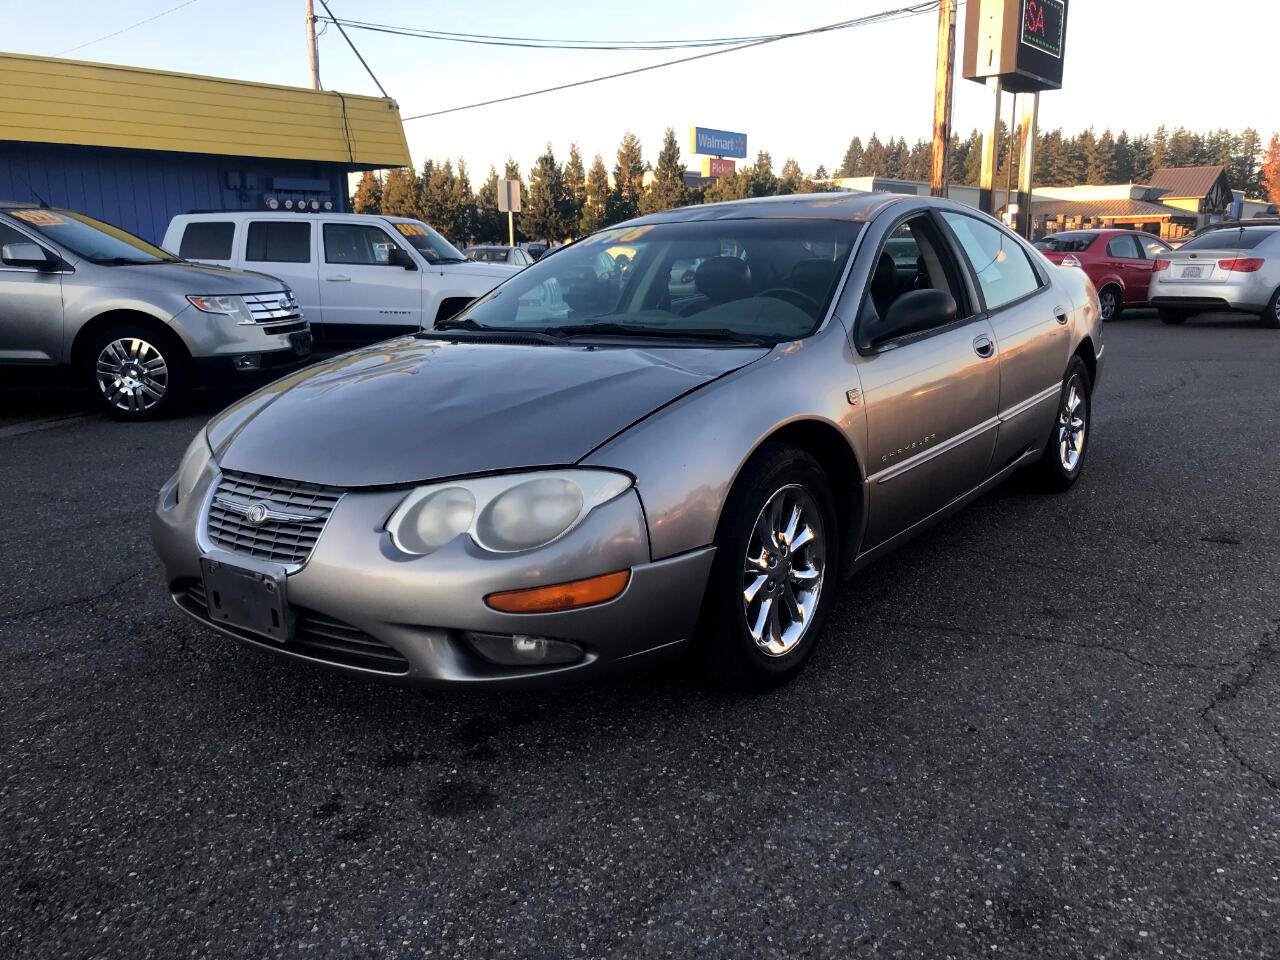 Used 1999 Chrysler 300M 4dr Sdn for Sale in WA